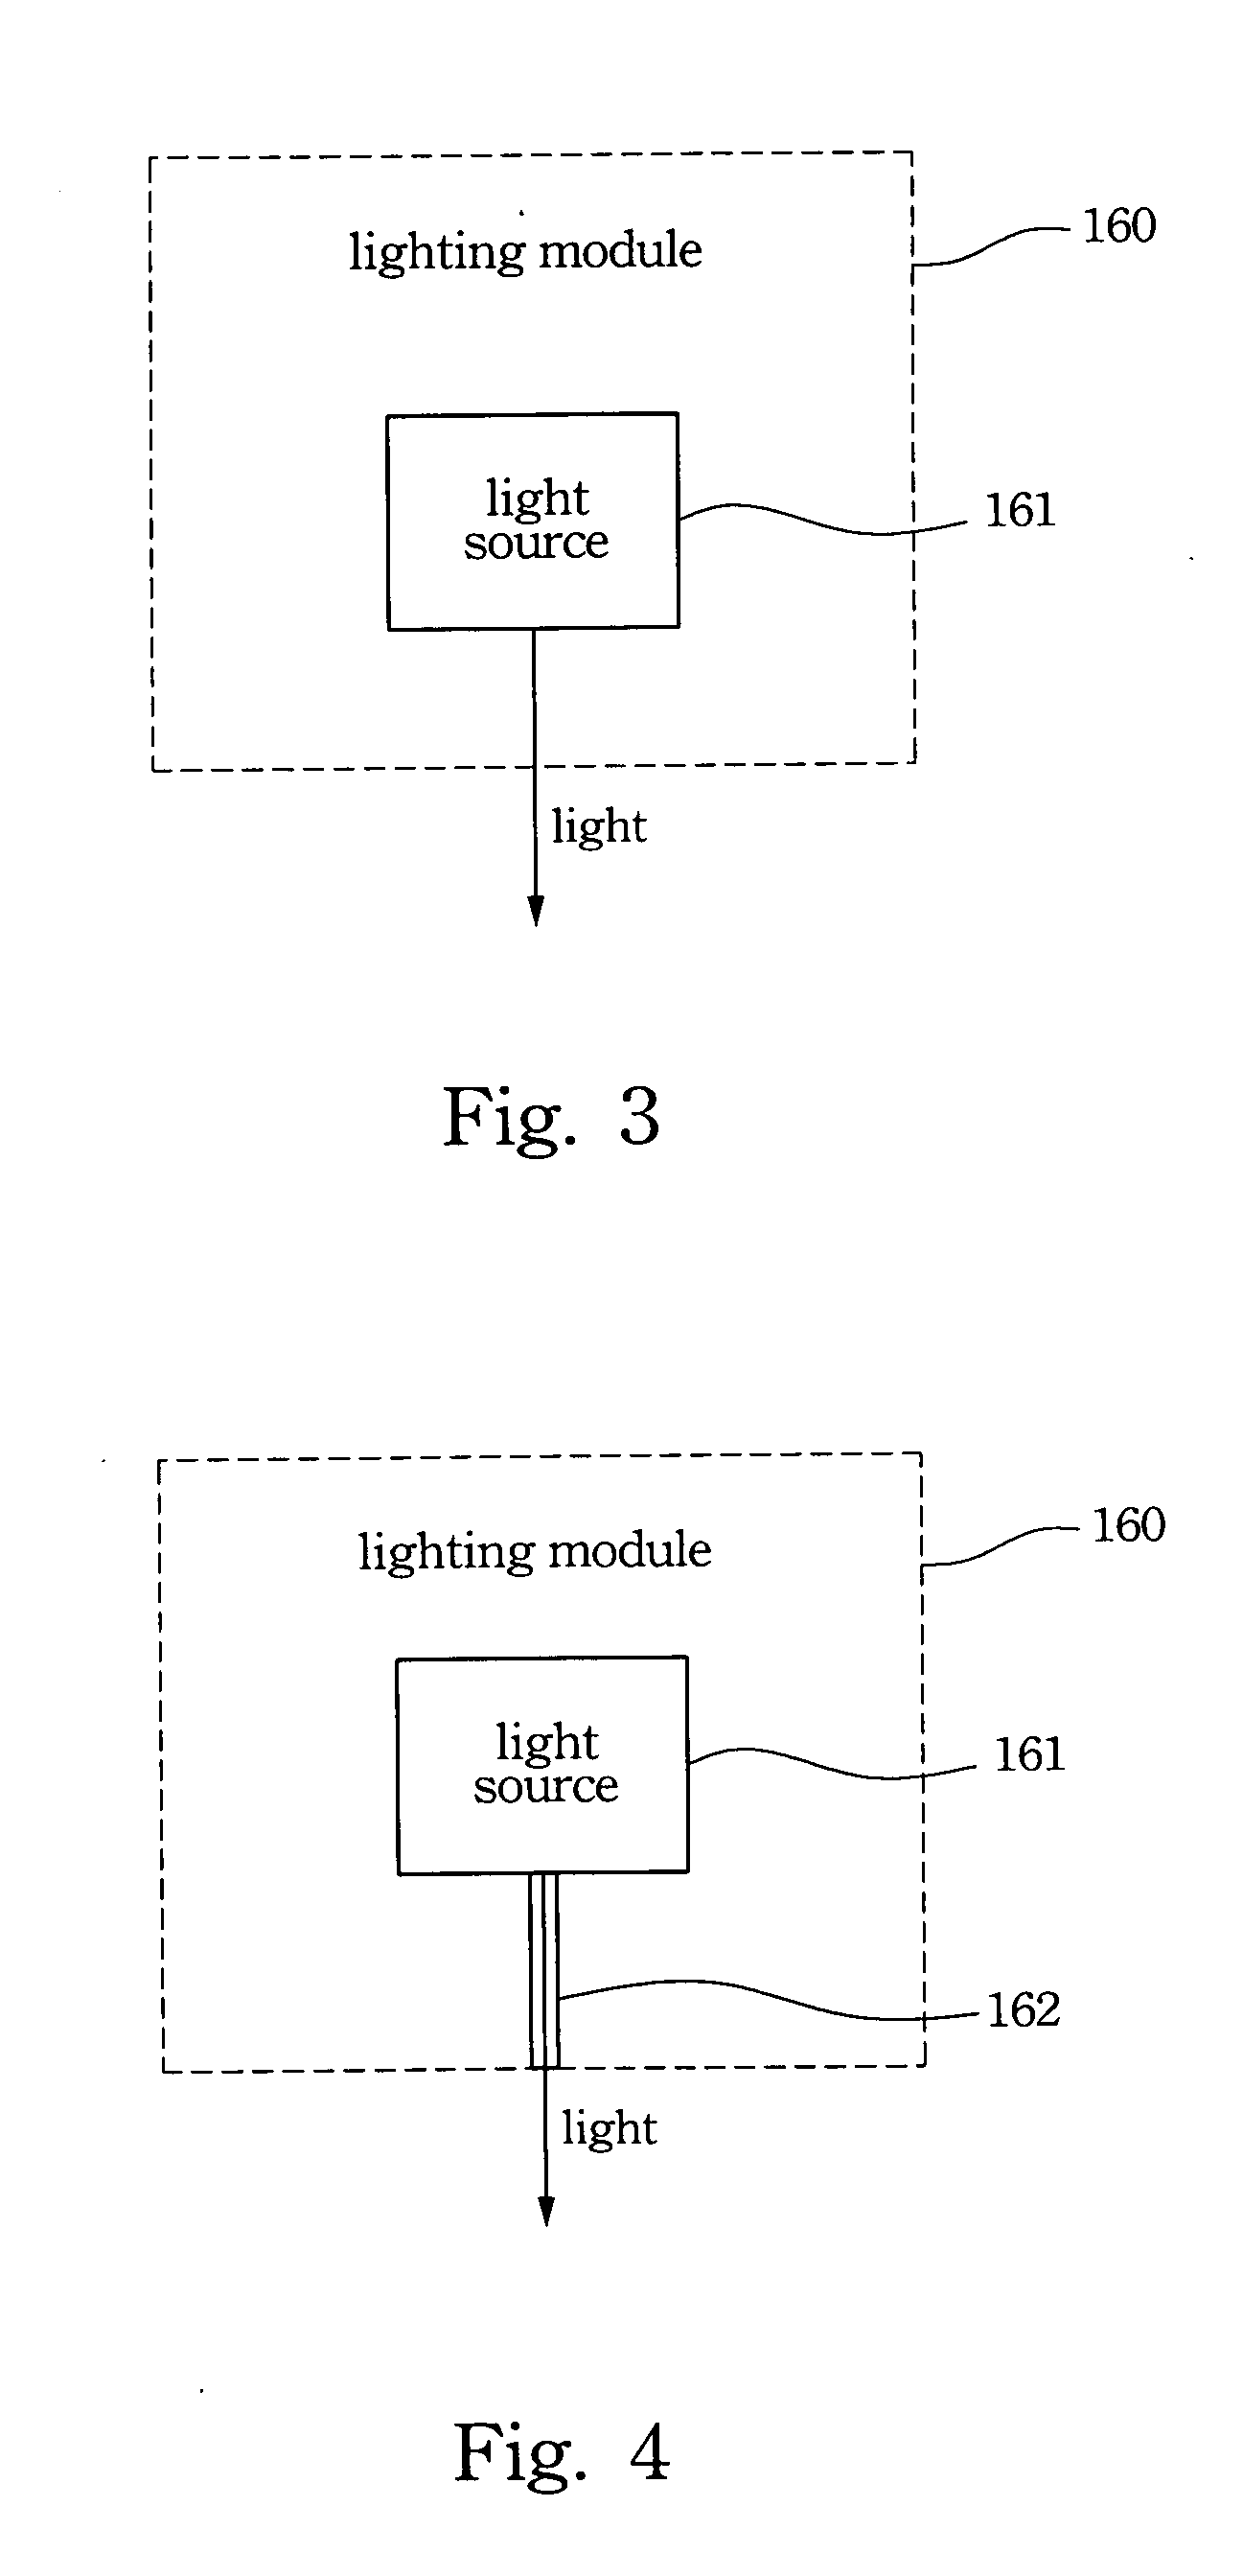 Modulized micro projection device